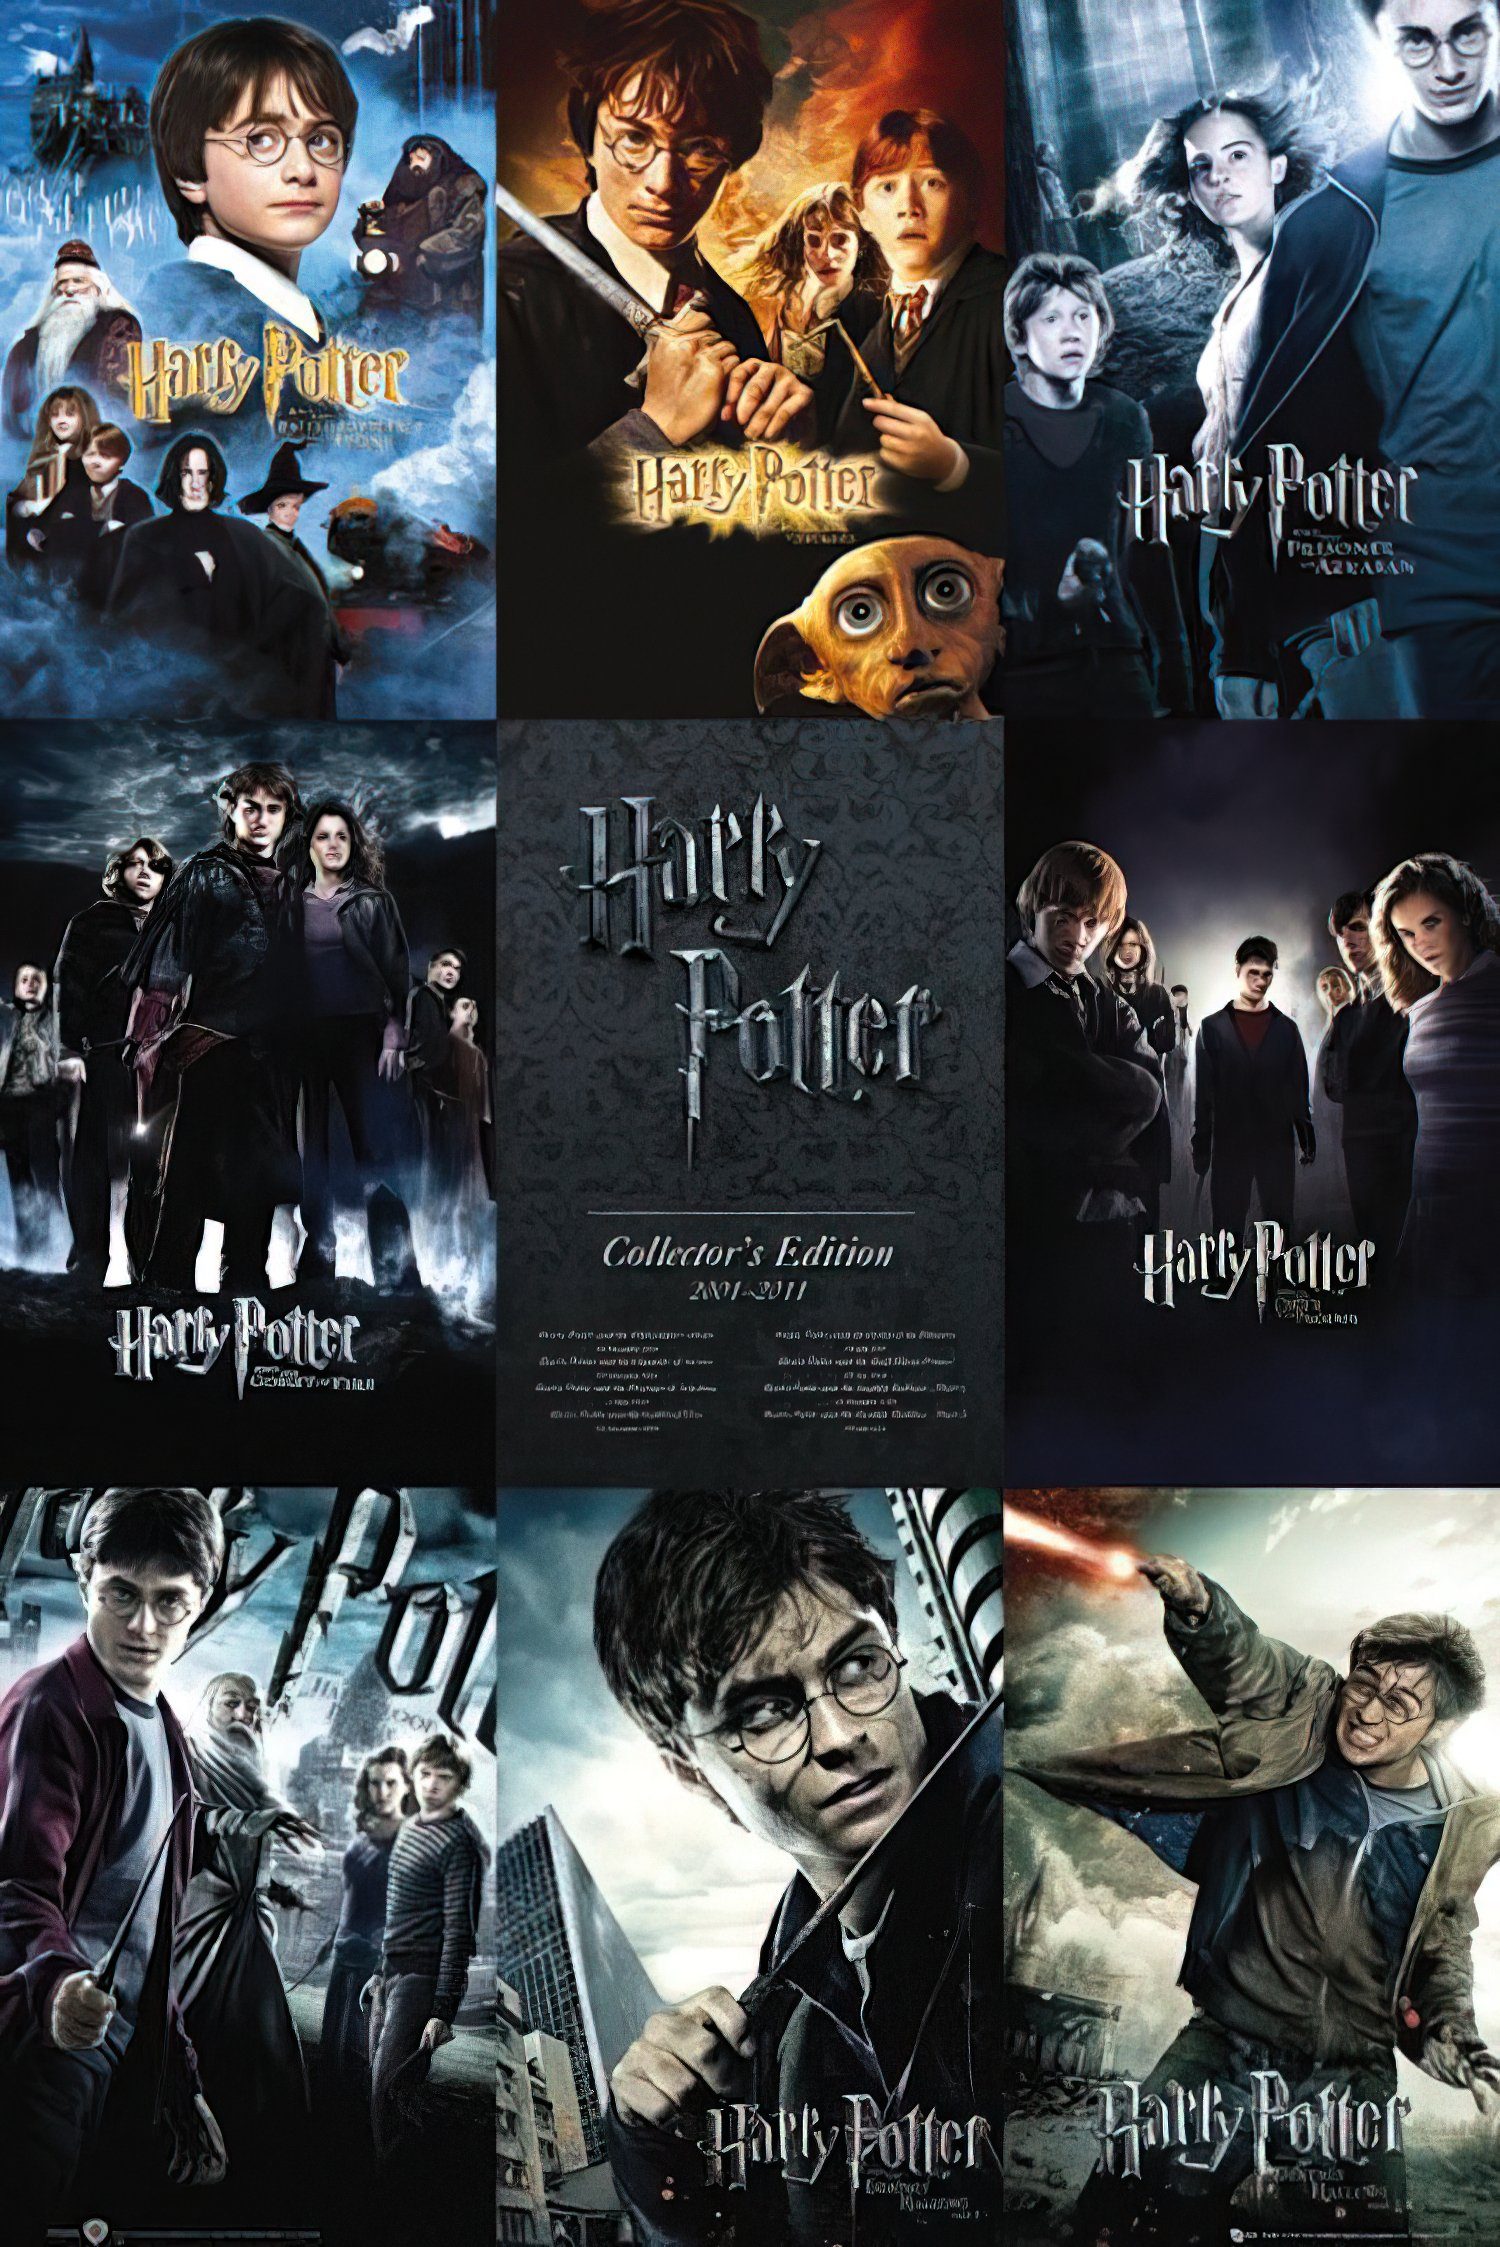 GB eye Poster Harry Potter Poster Collector's Edition 2001-2011 61 x 91,5